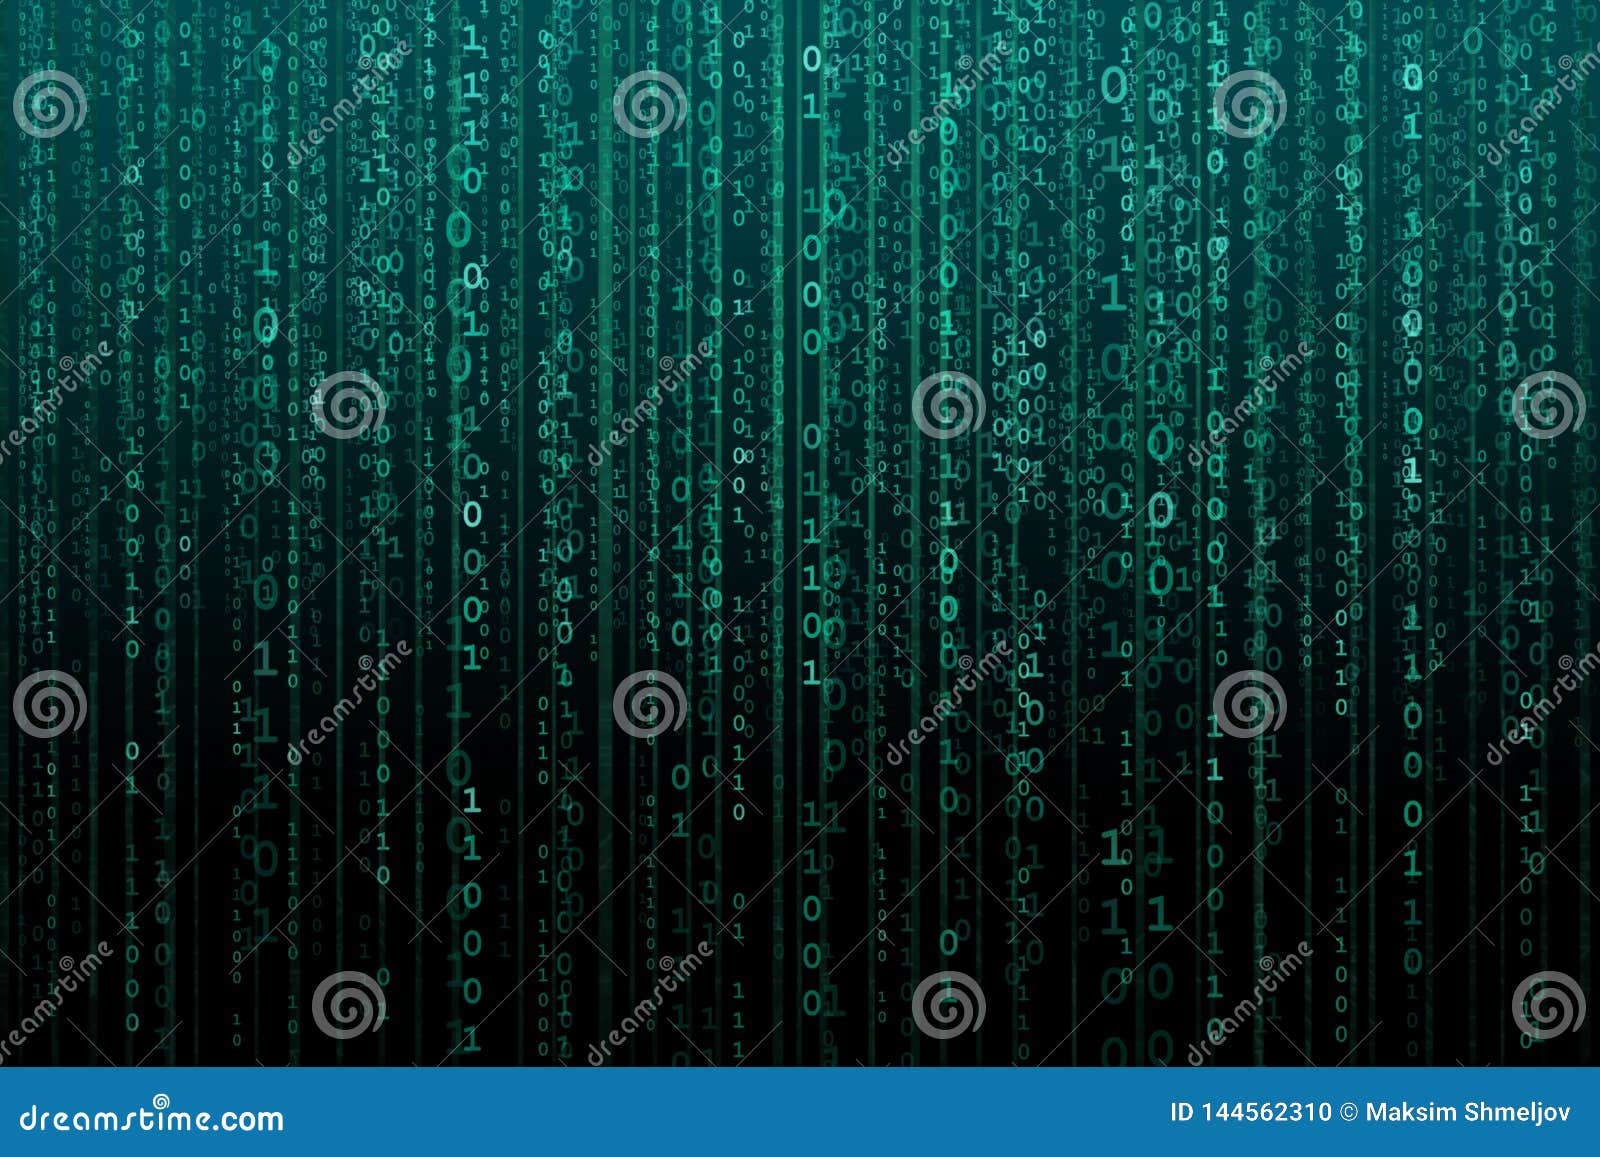 abstract digital background with binary code. hackers, darknet, virtual reality and science fiction.